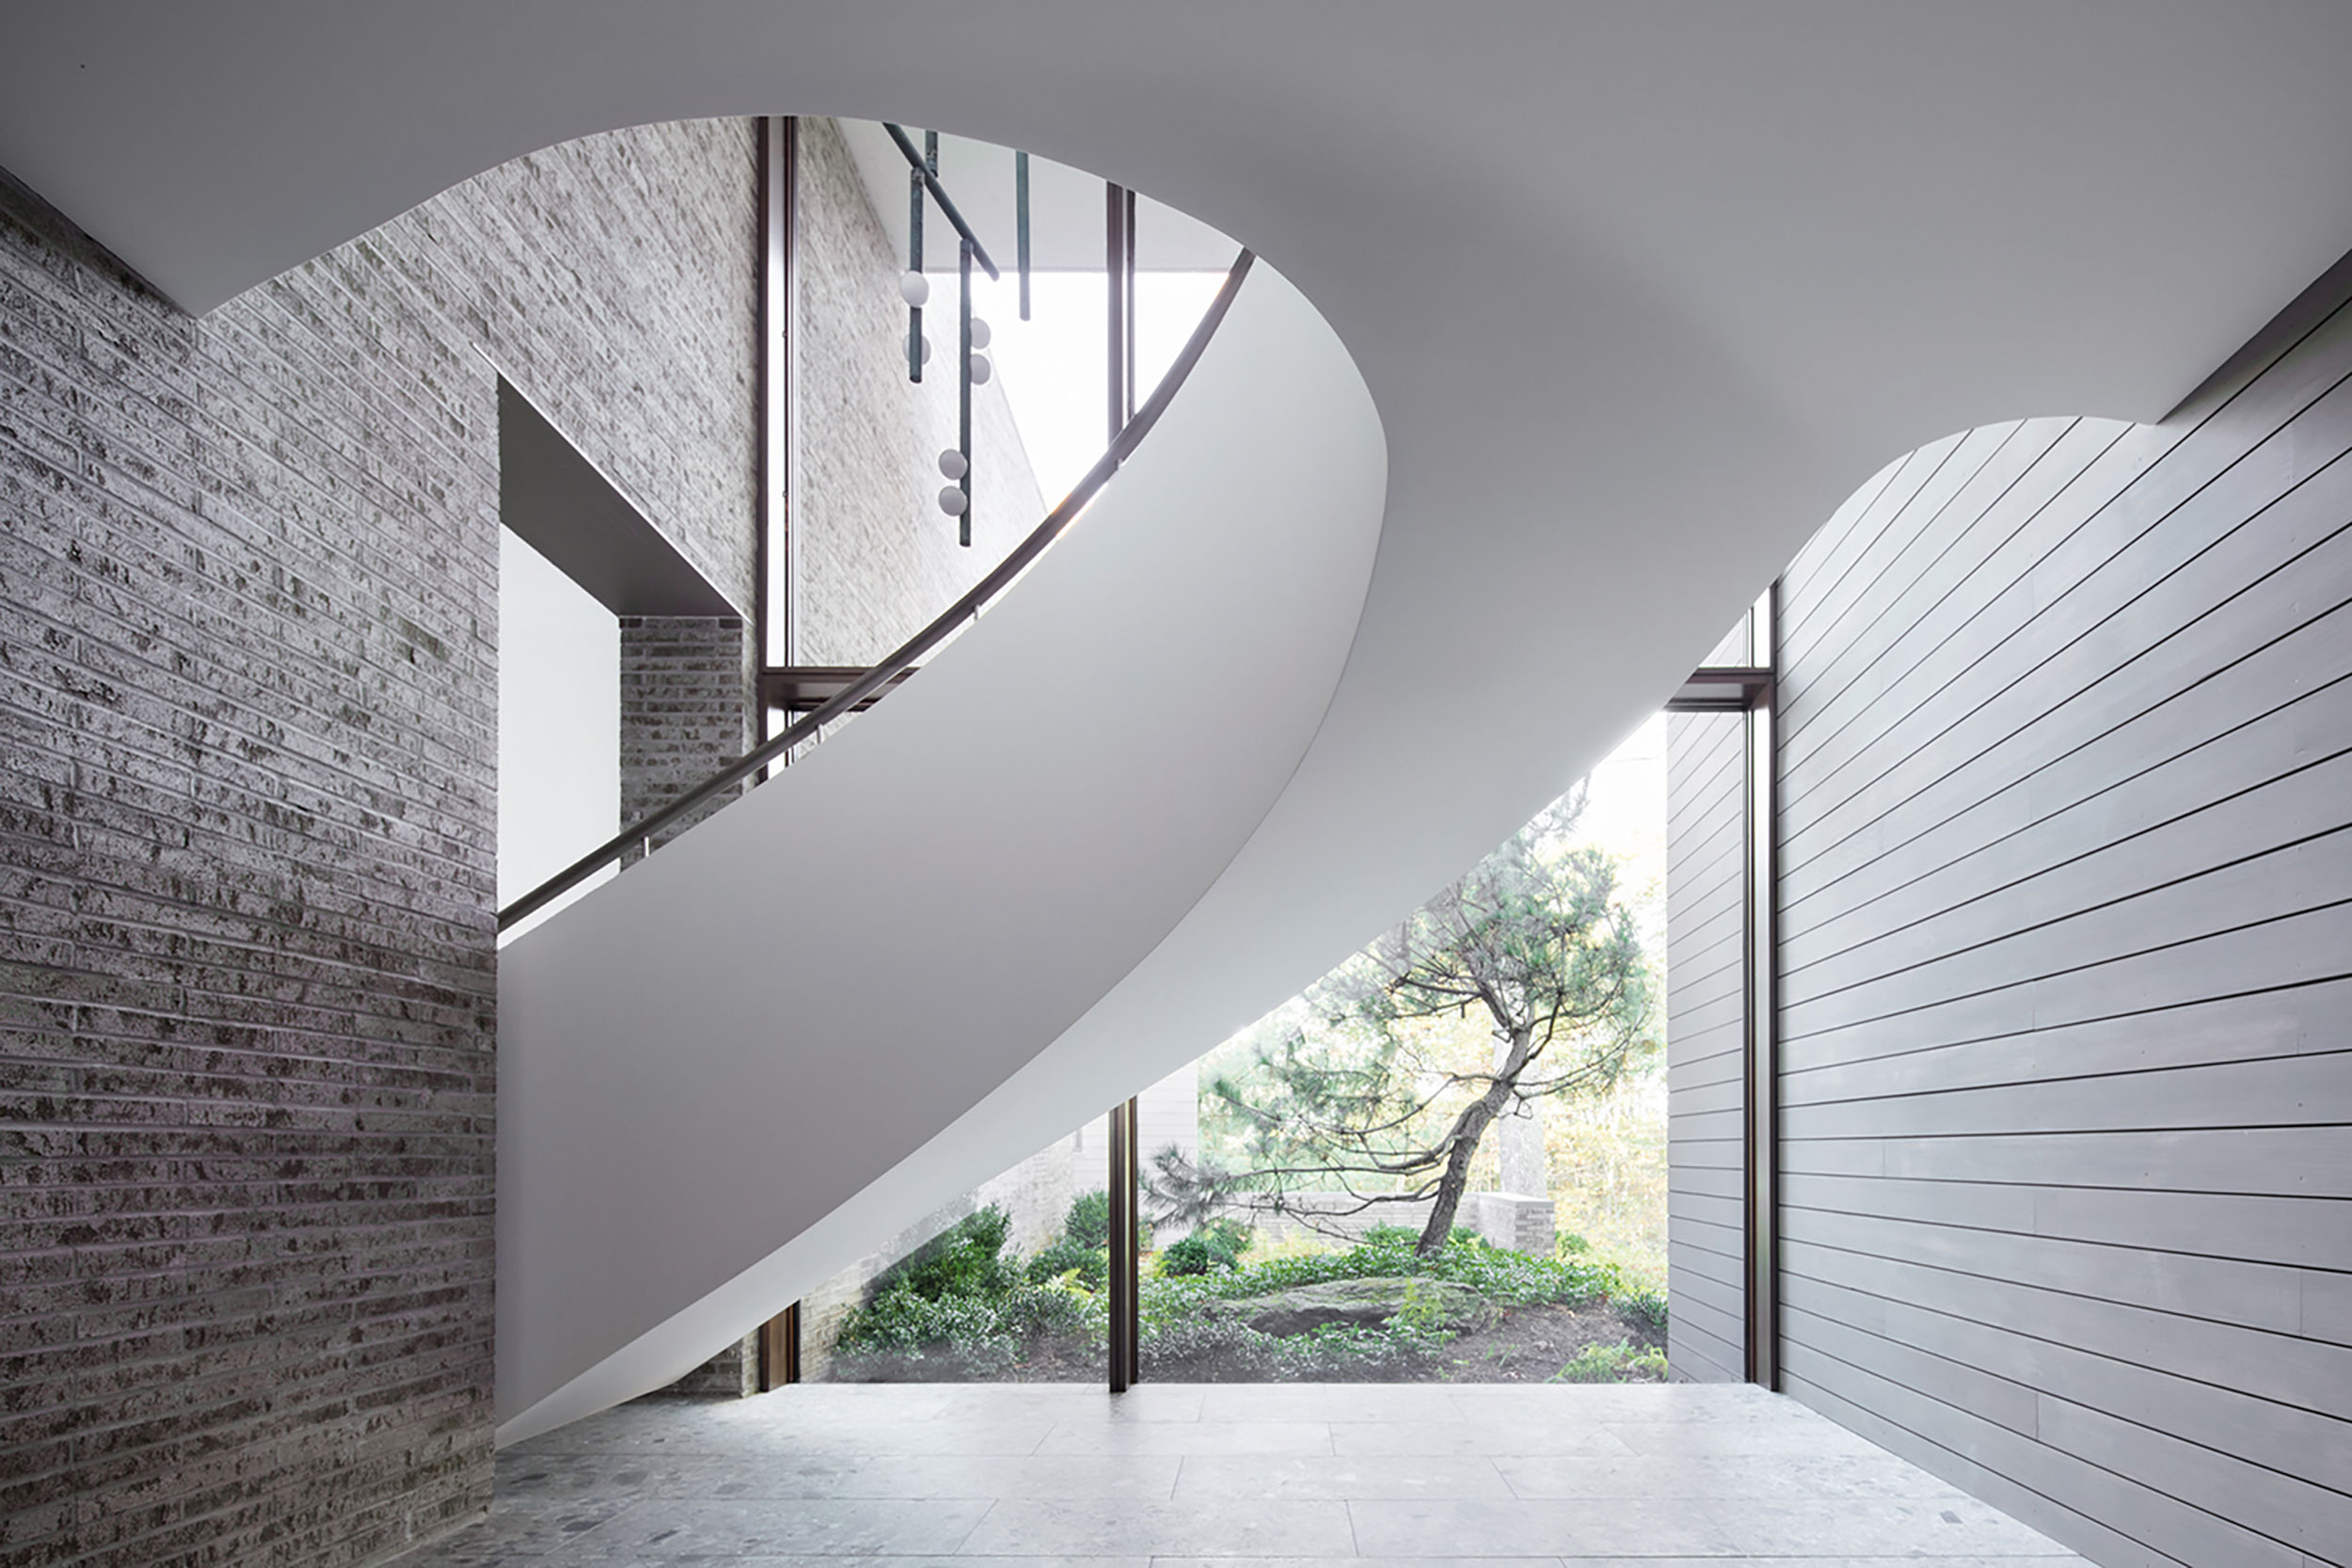 The smooth, white underside of a staircase suspended over a stone floor, with a glass wall in the background looking out to nature